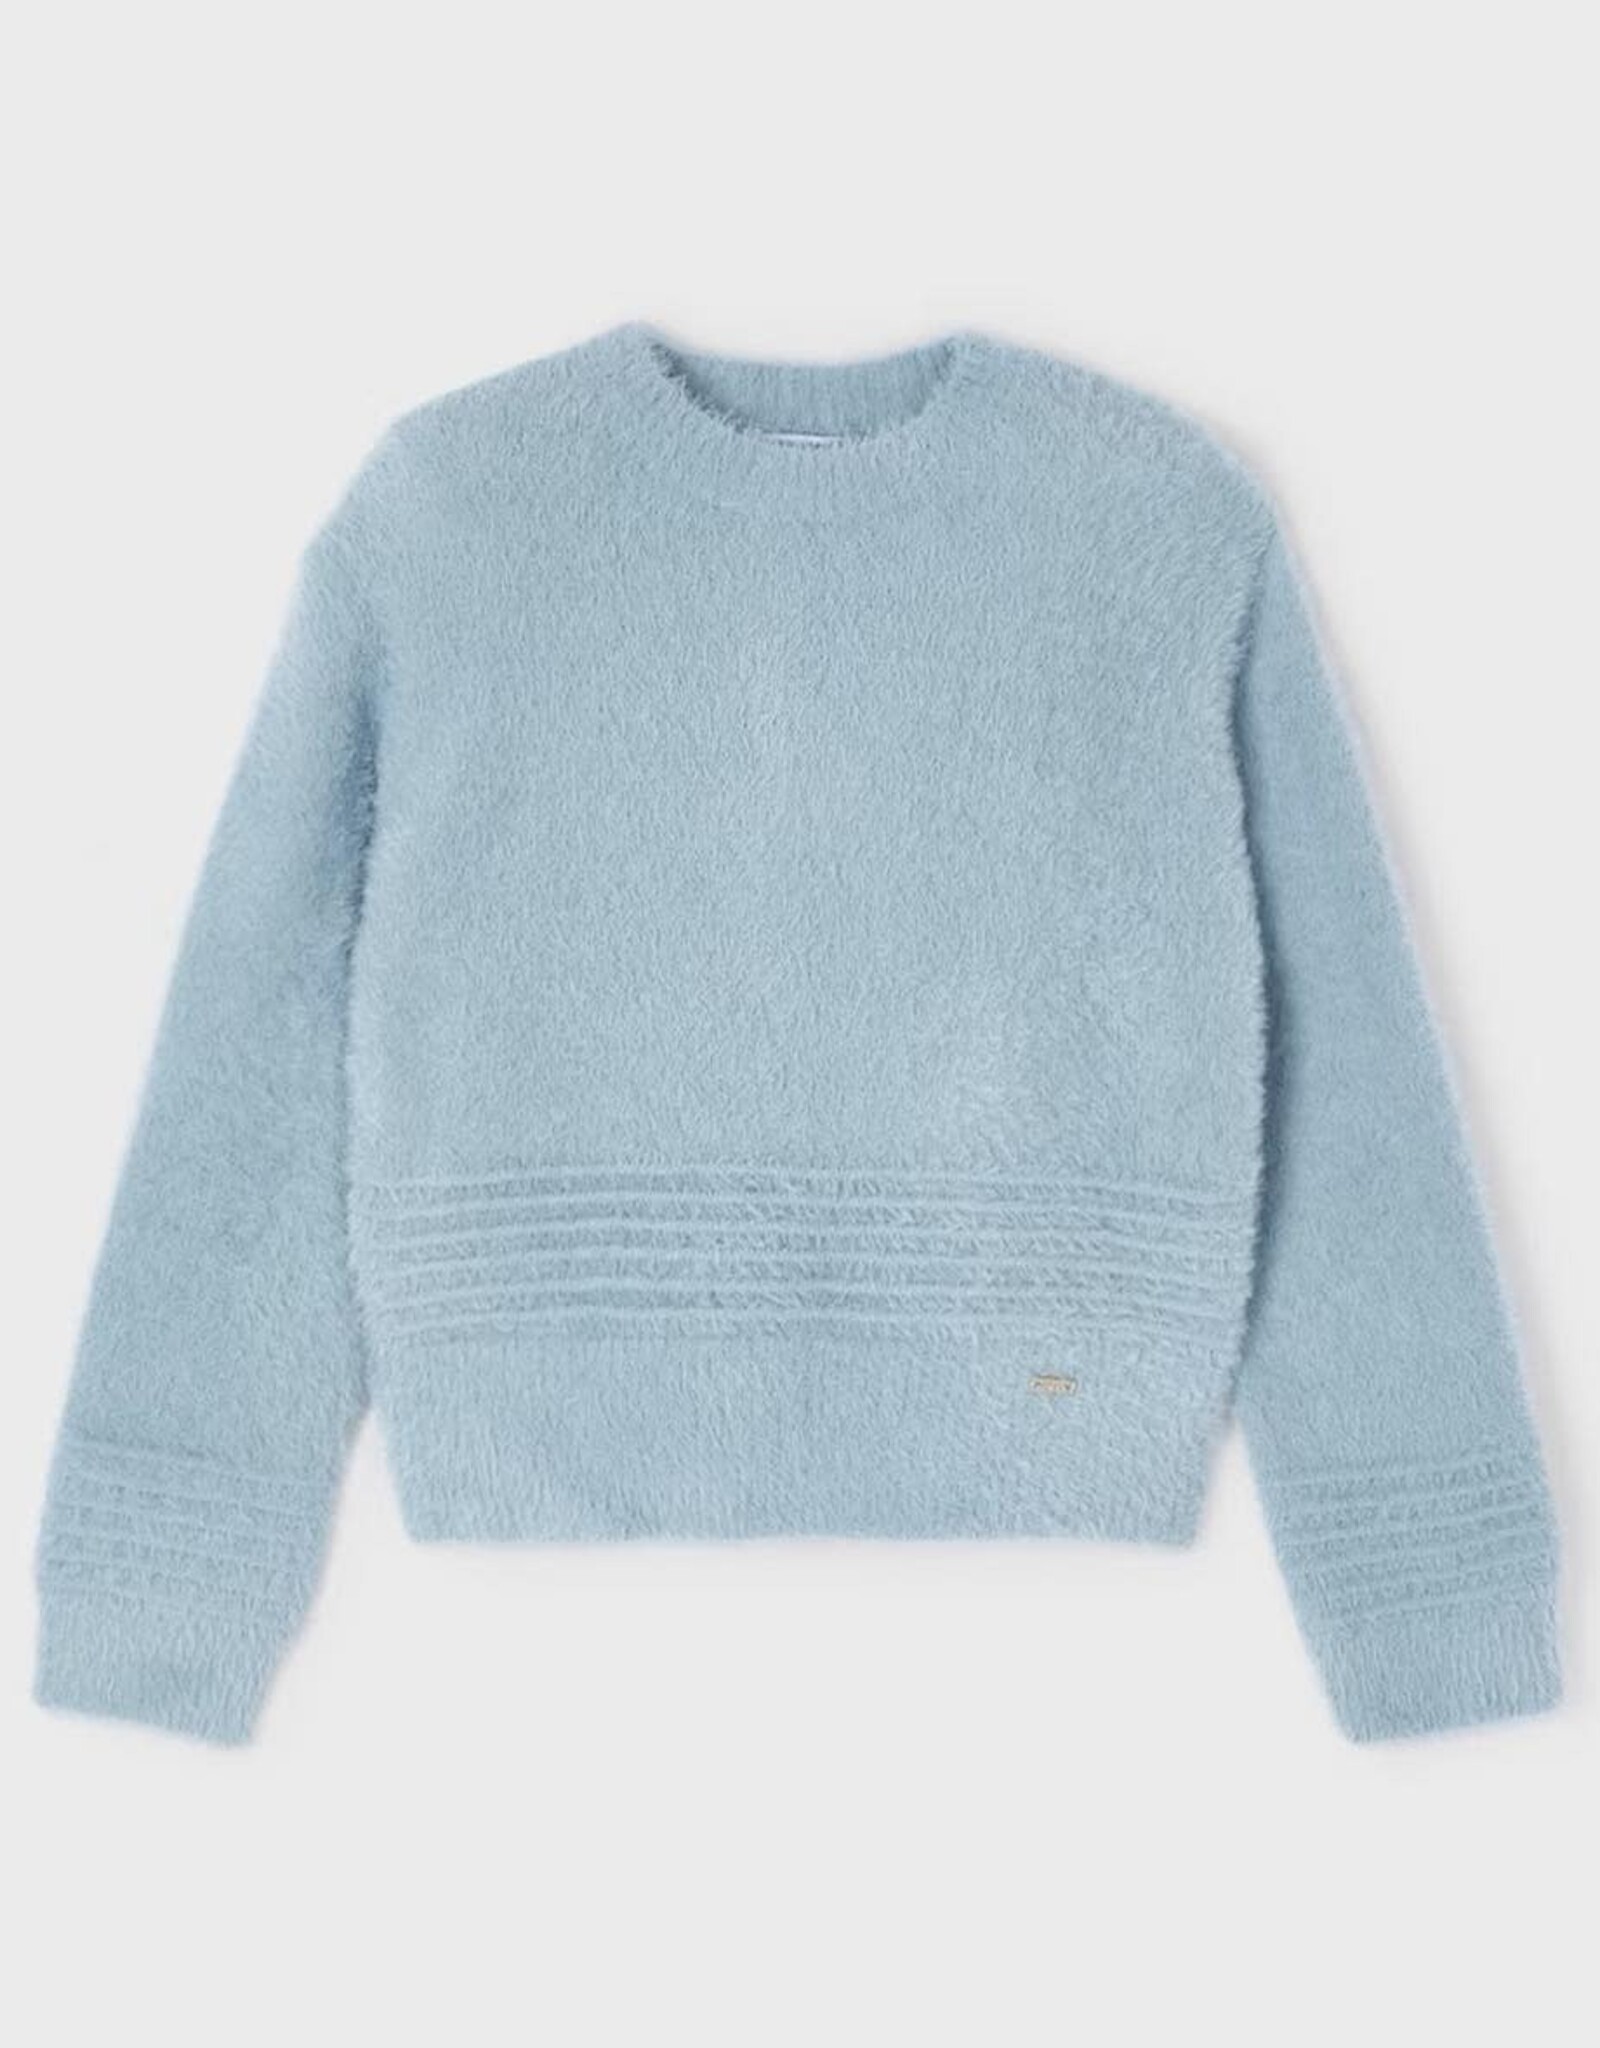 Mayoral Lexi Sweater in Blue